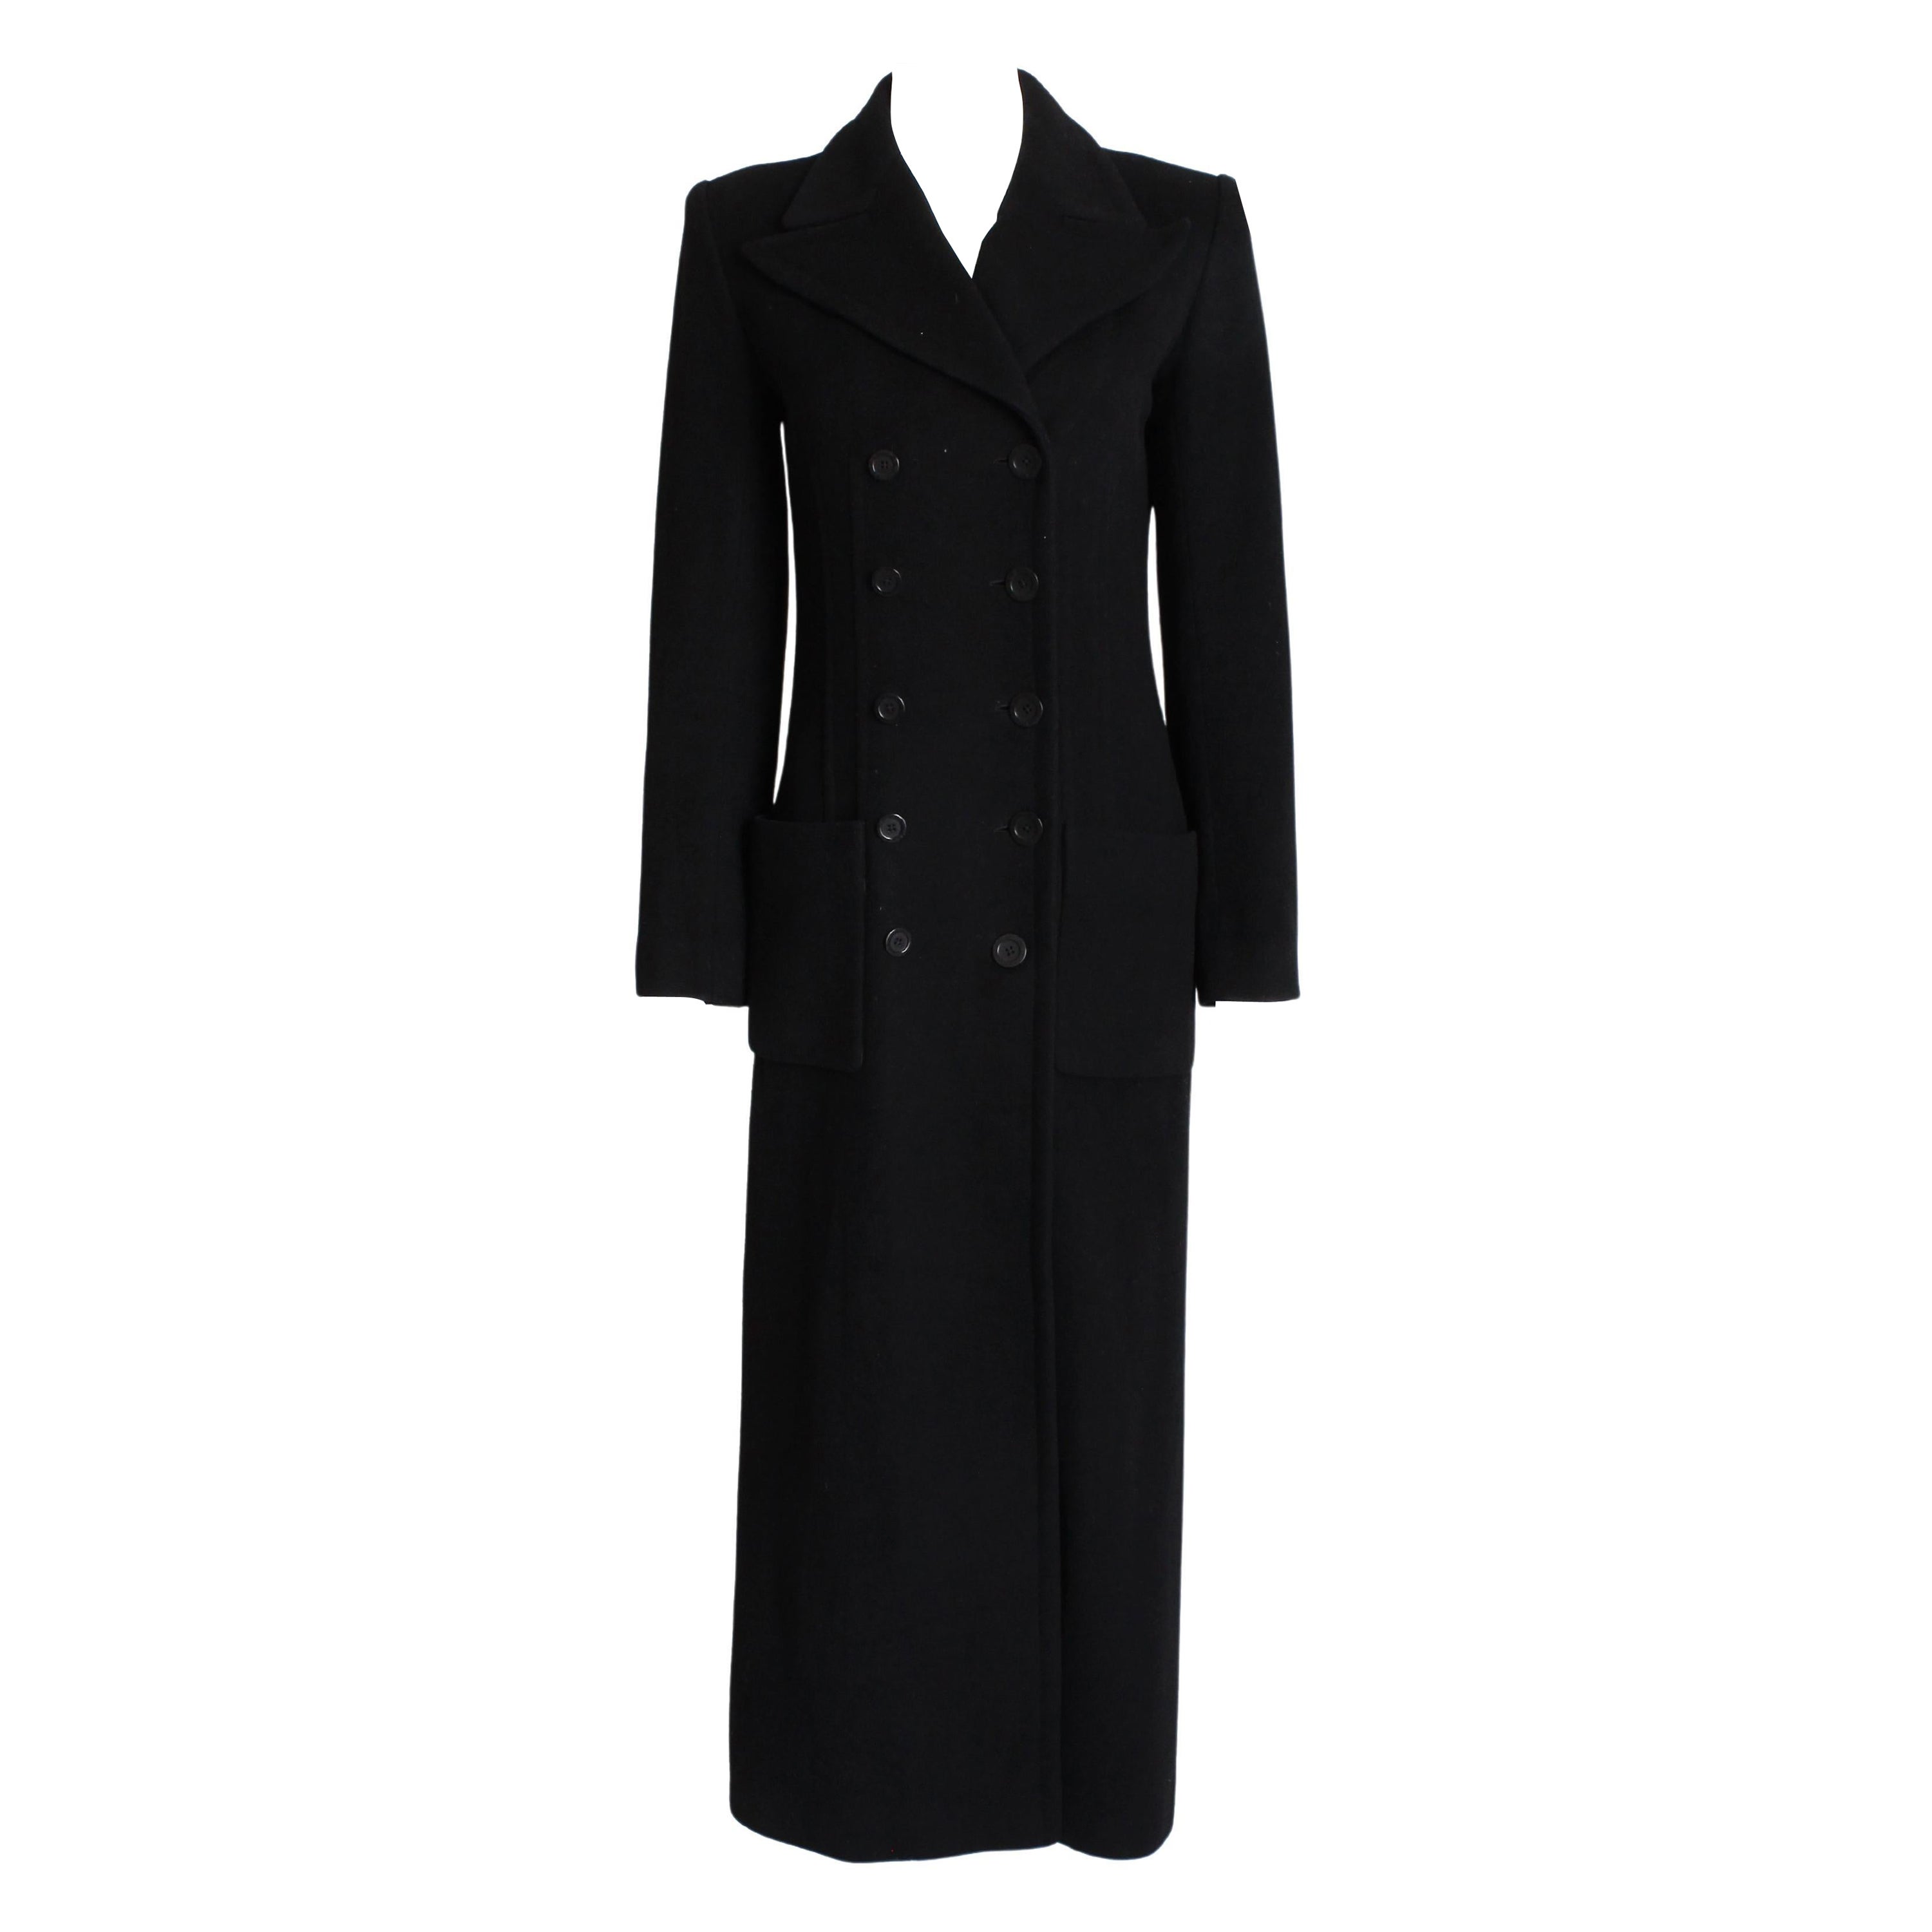 Sonia Rykiel Cashmere Coat Black Double Breasted Long Trench Style Sz 38 Vintage